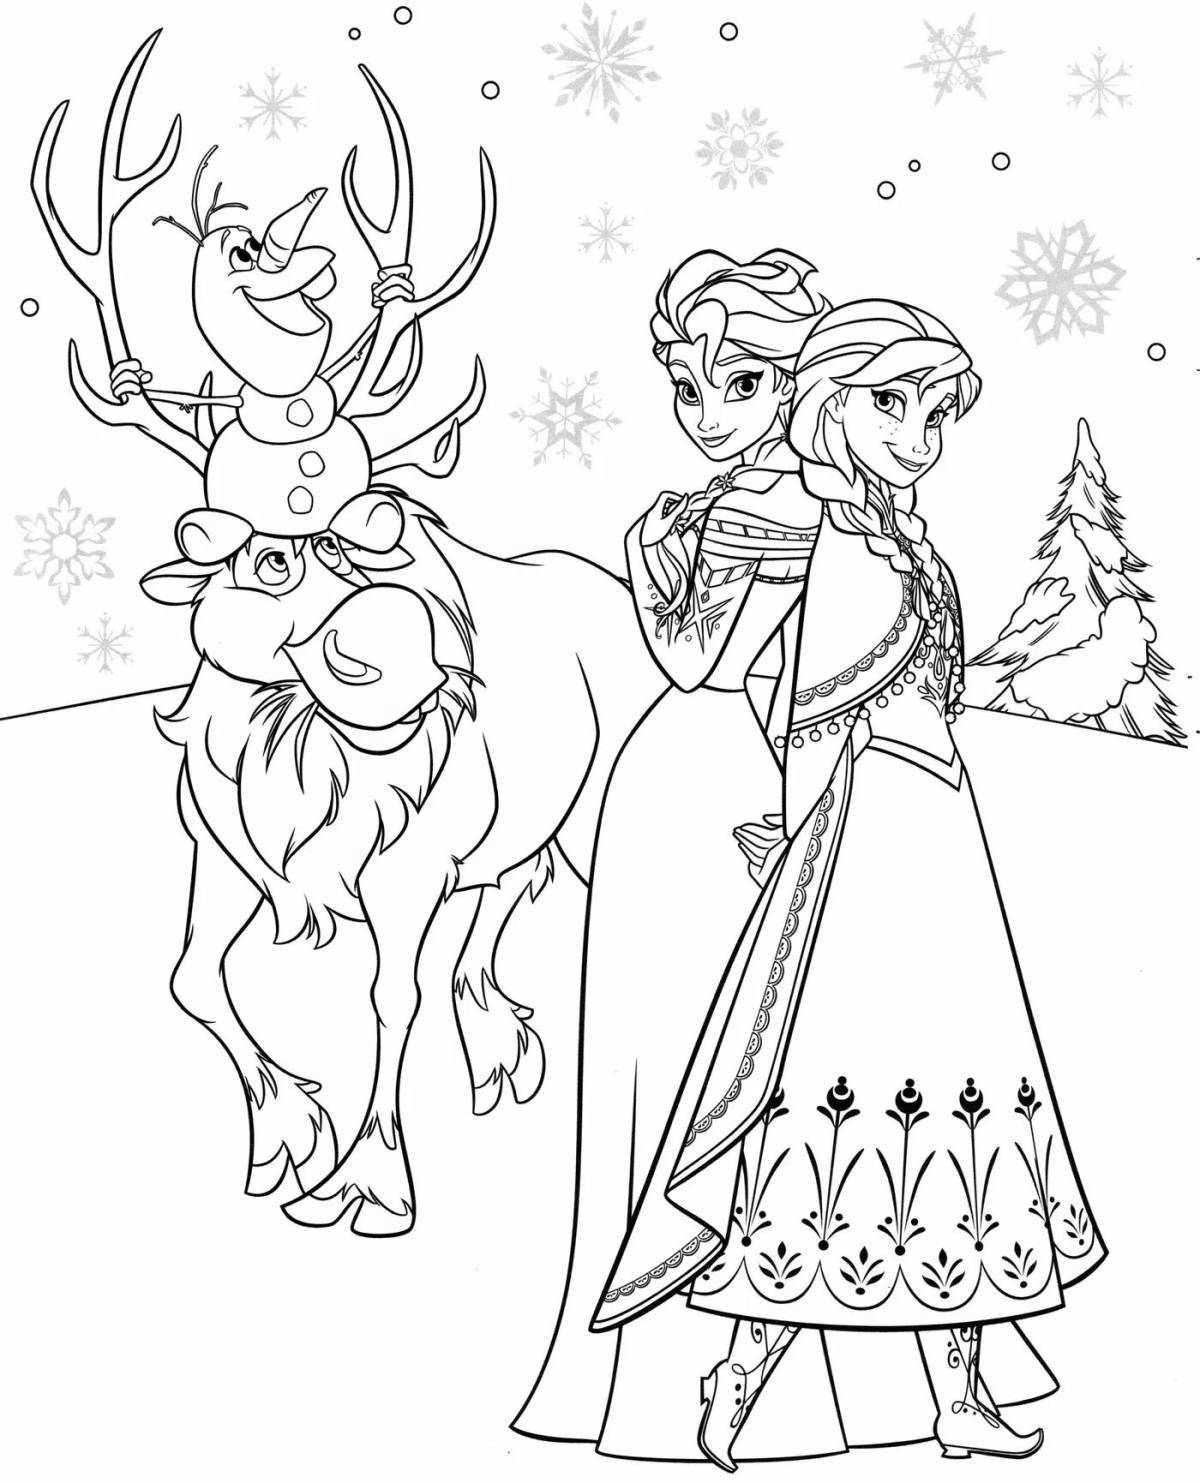 Cute elsa coloring book for kids 5-6 years old